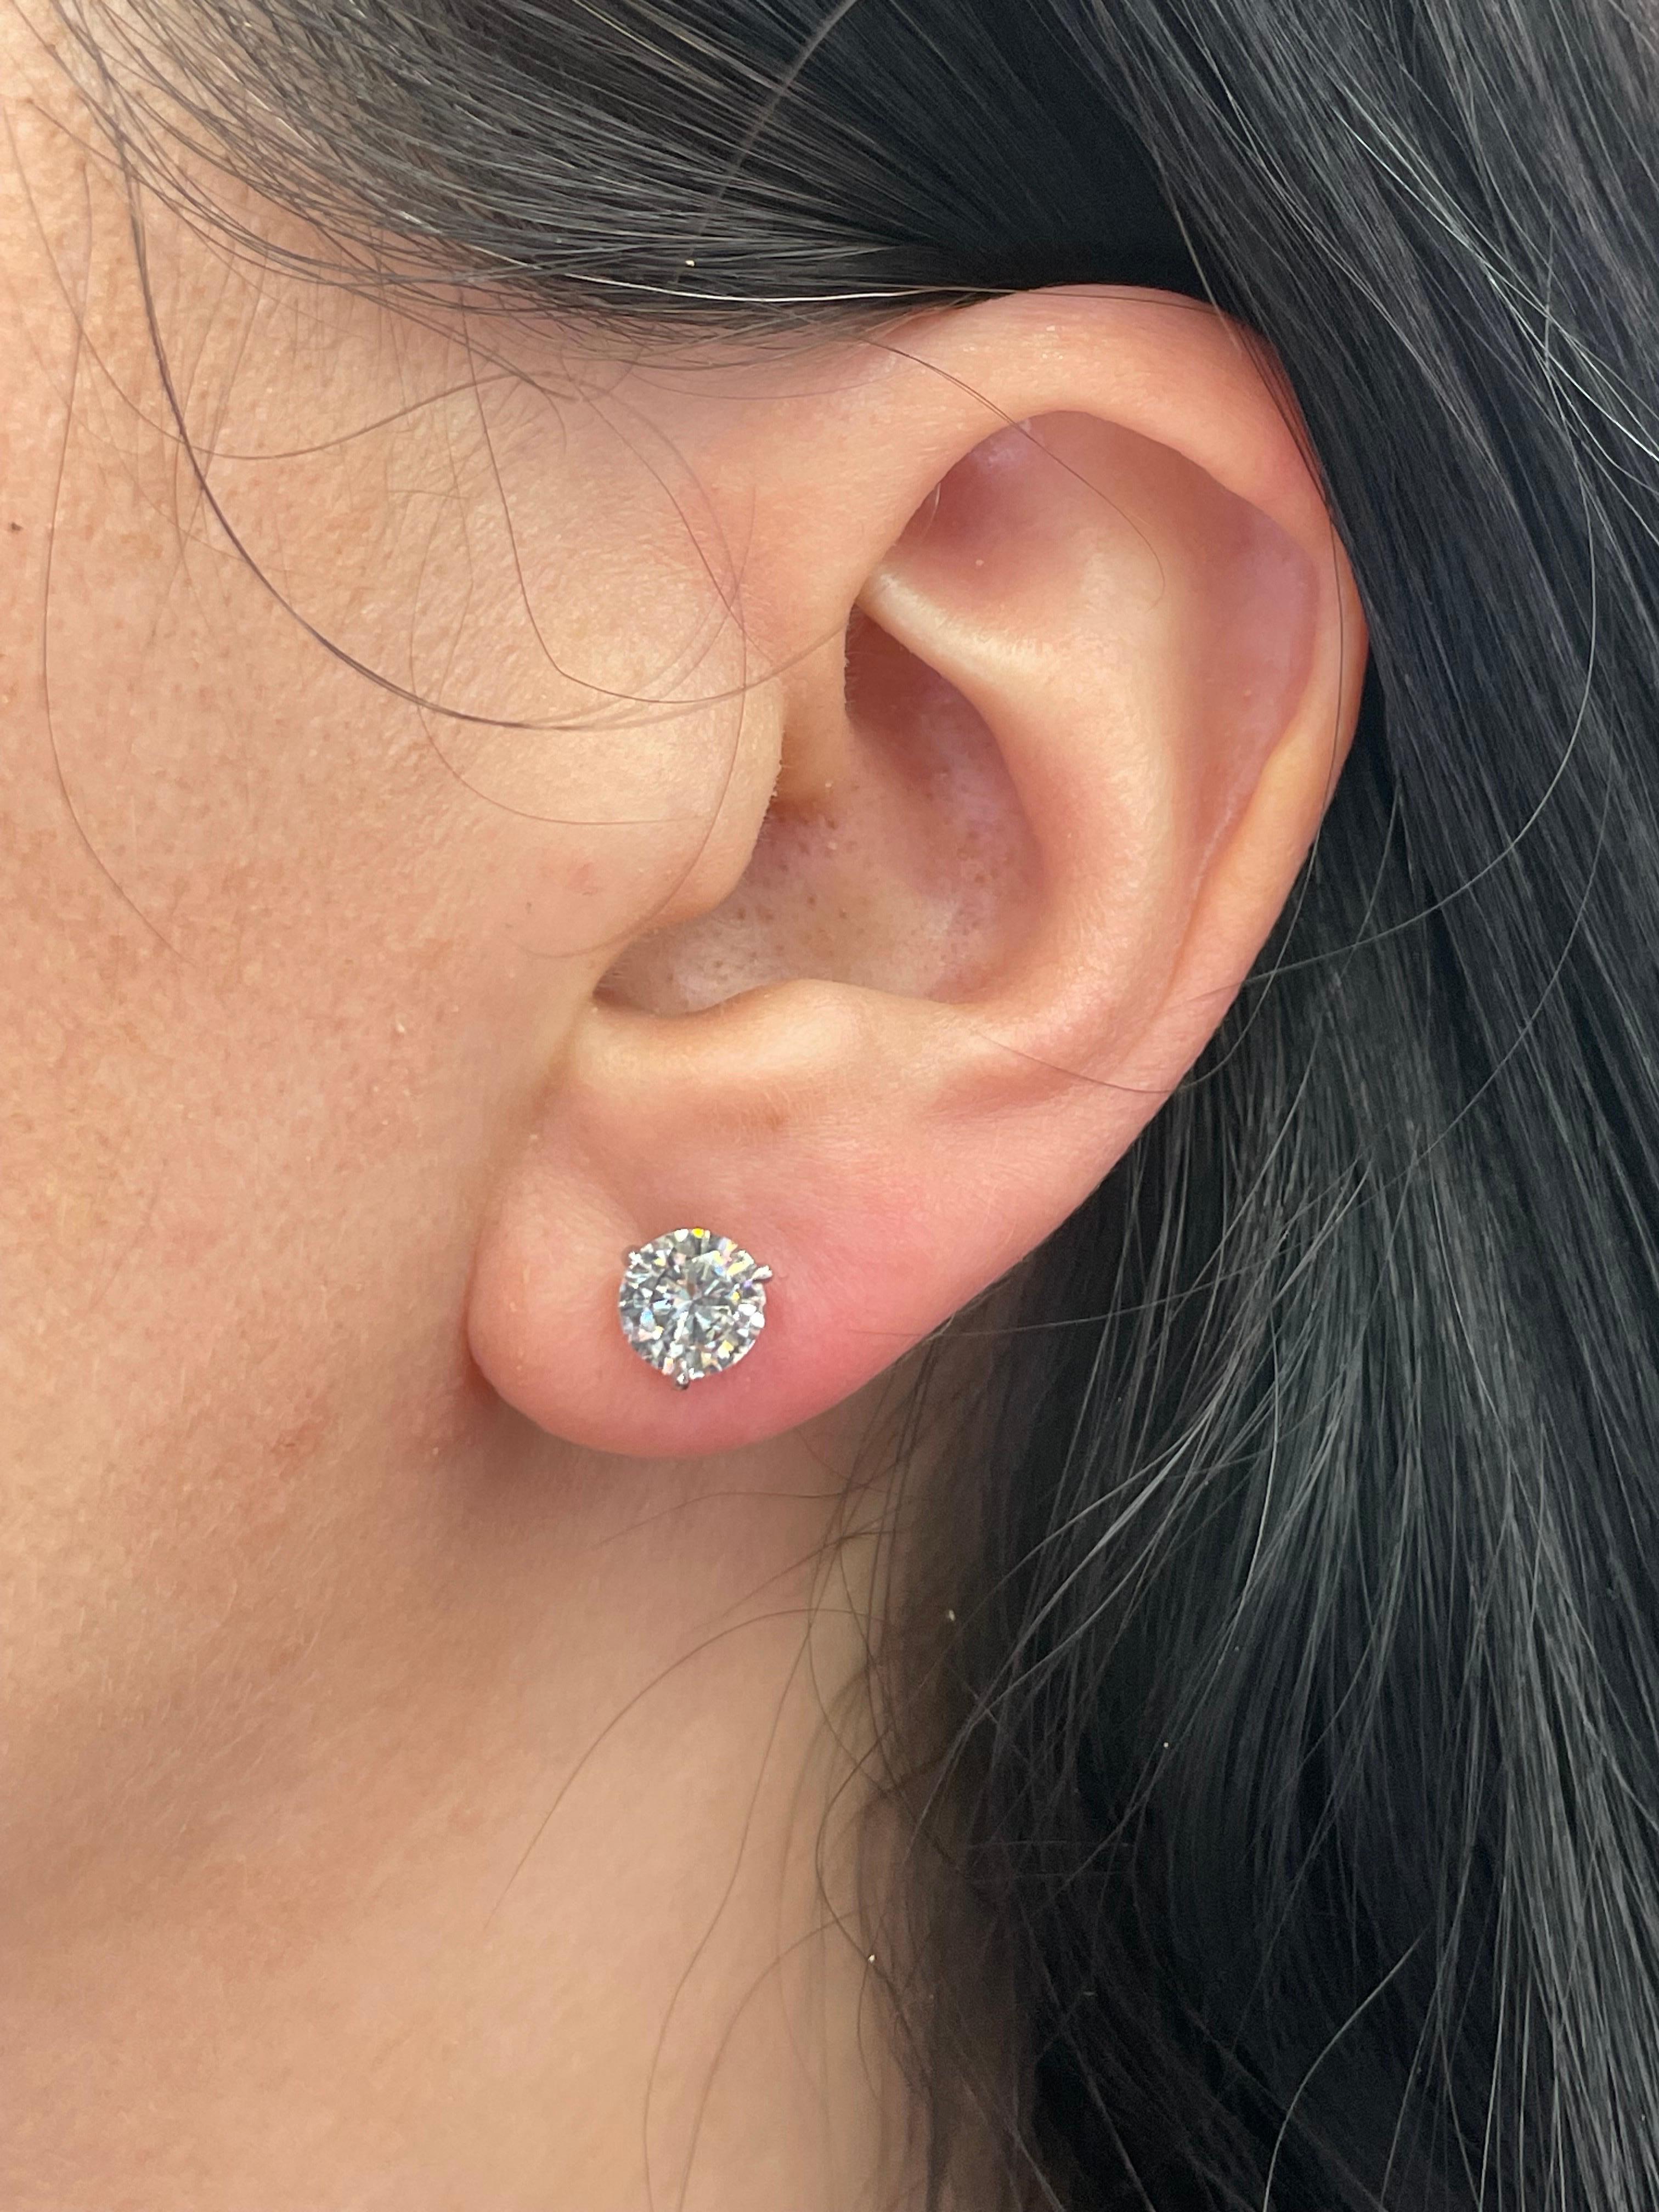 Diamond stud earrings weighing 2.09 Carats, Color H, Clarity I1, in 18 Karat White Gold 3 prong Champagne setting. 
Nice Life & Clean to the Eye
Setting can be changed to a Basket, Martini or Champagne/ 3 or 4 Prong/ 14 or 18 Karat.

DM for more